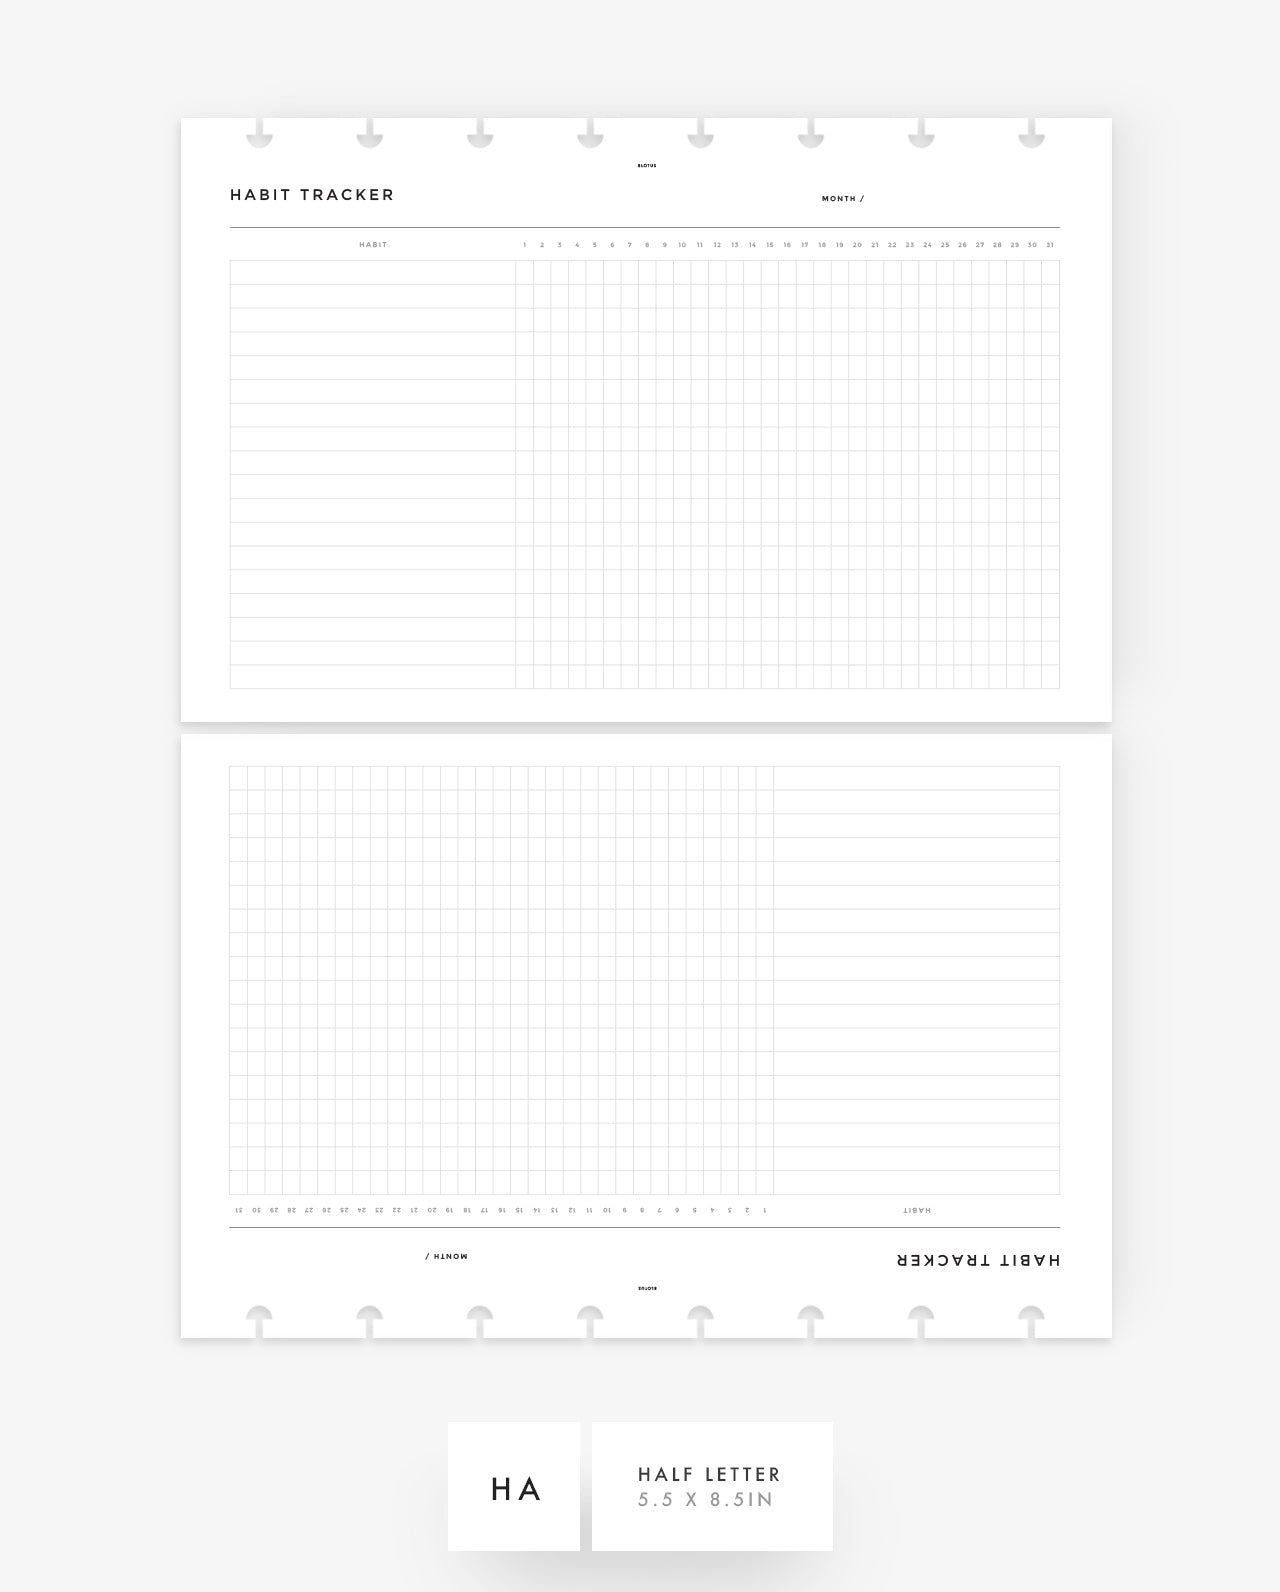 MN097 - Daily Habit Tracker Monthly View